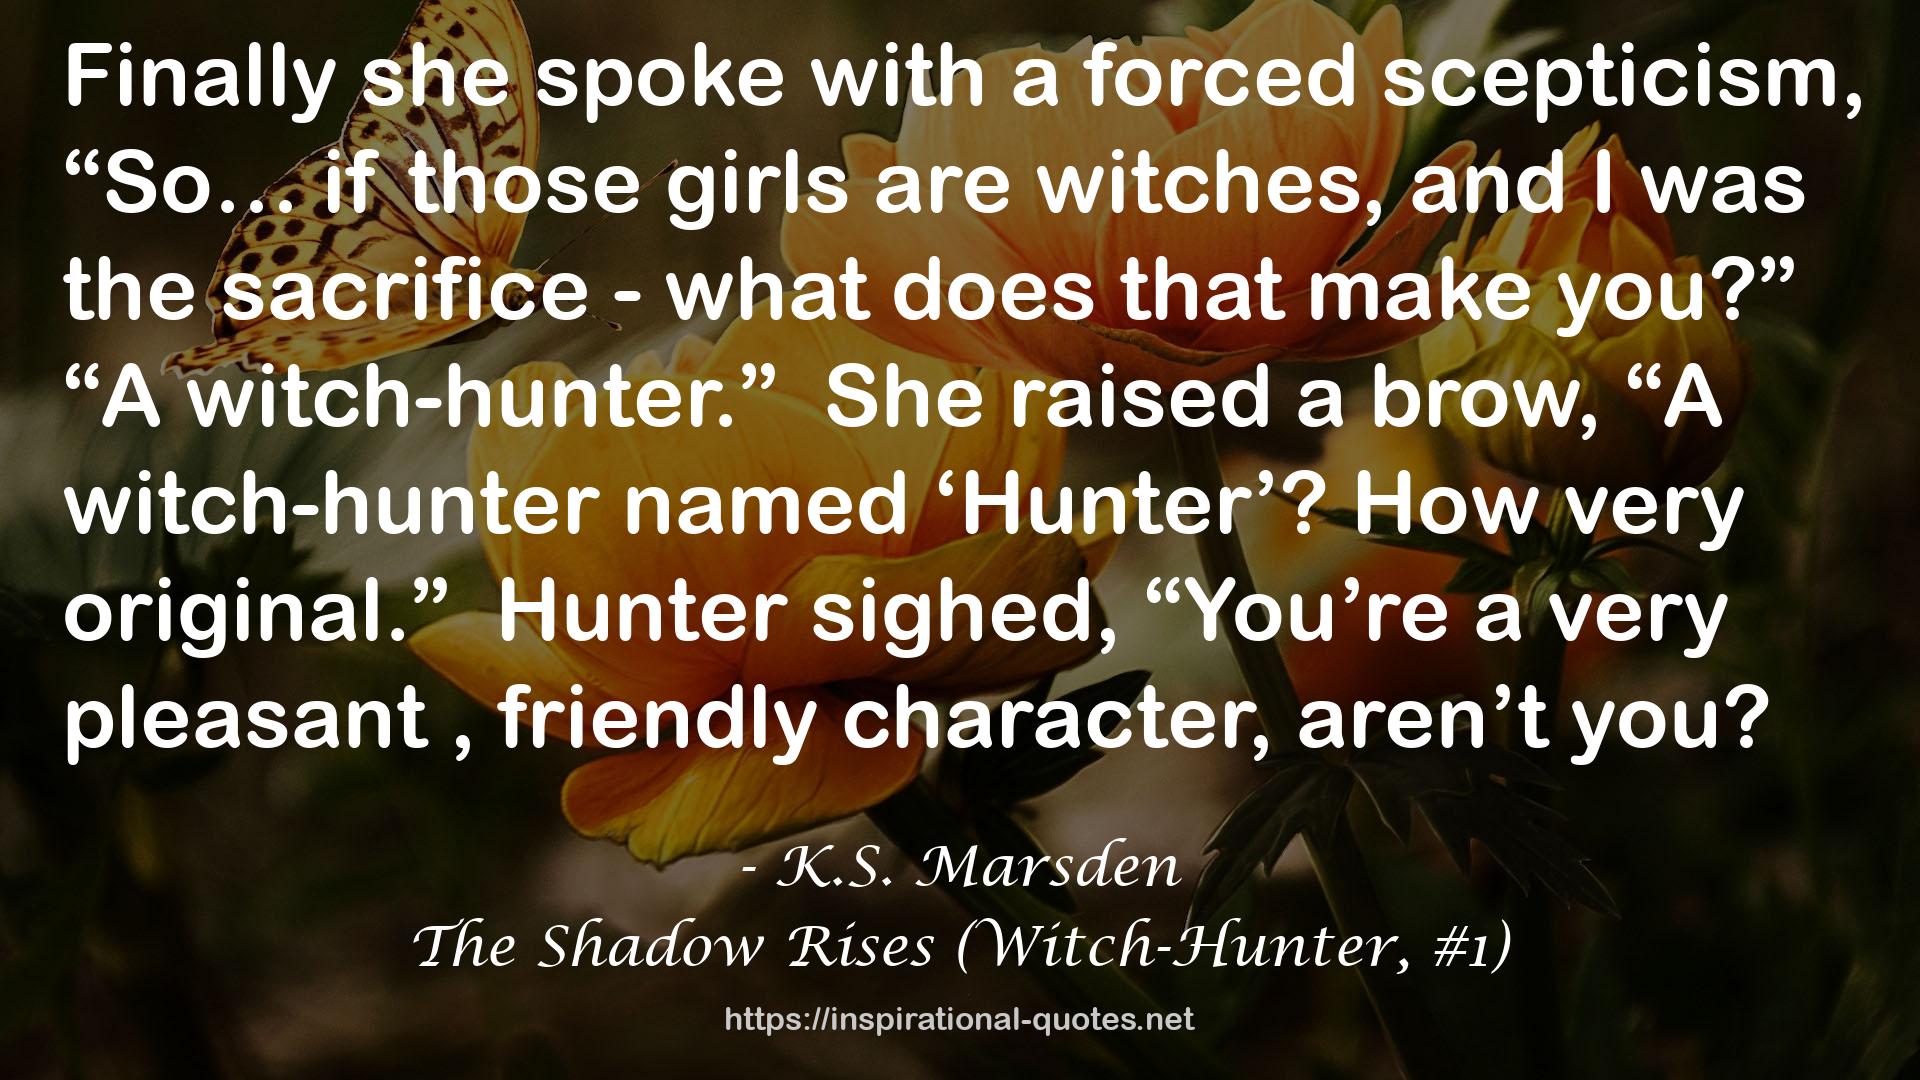 The Shadow Rises (Witch-Hunter, #1) QUOTES